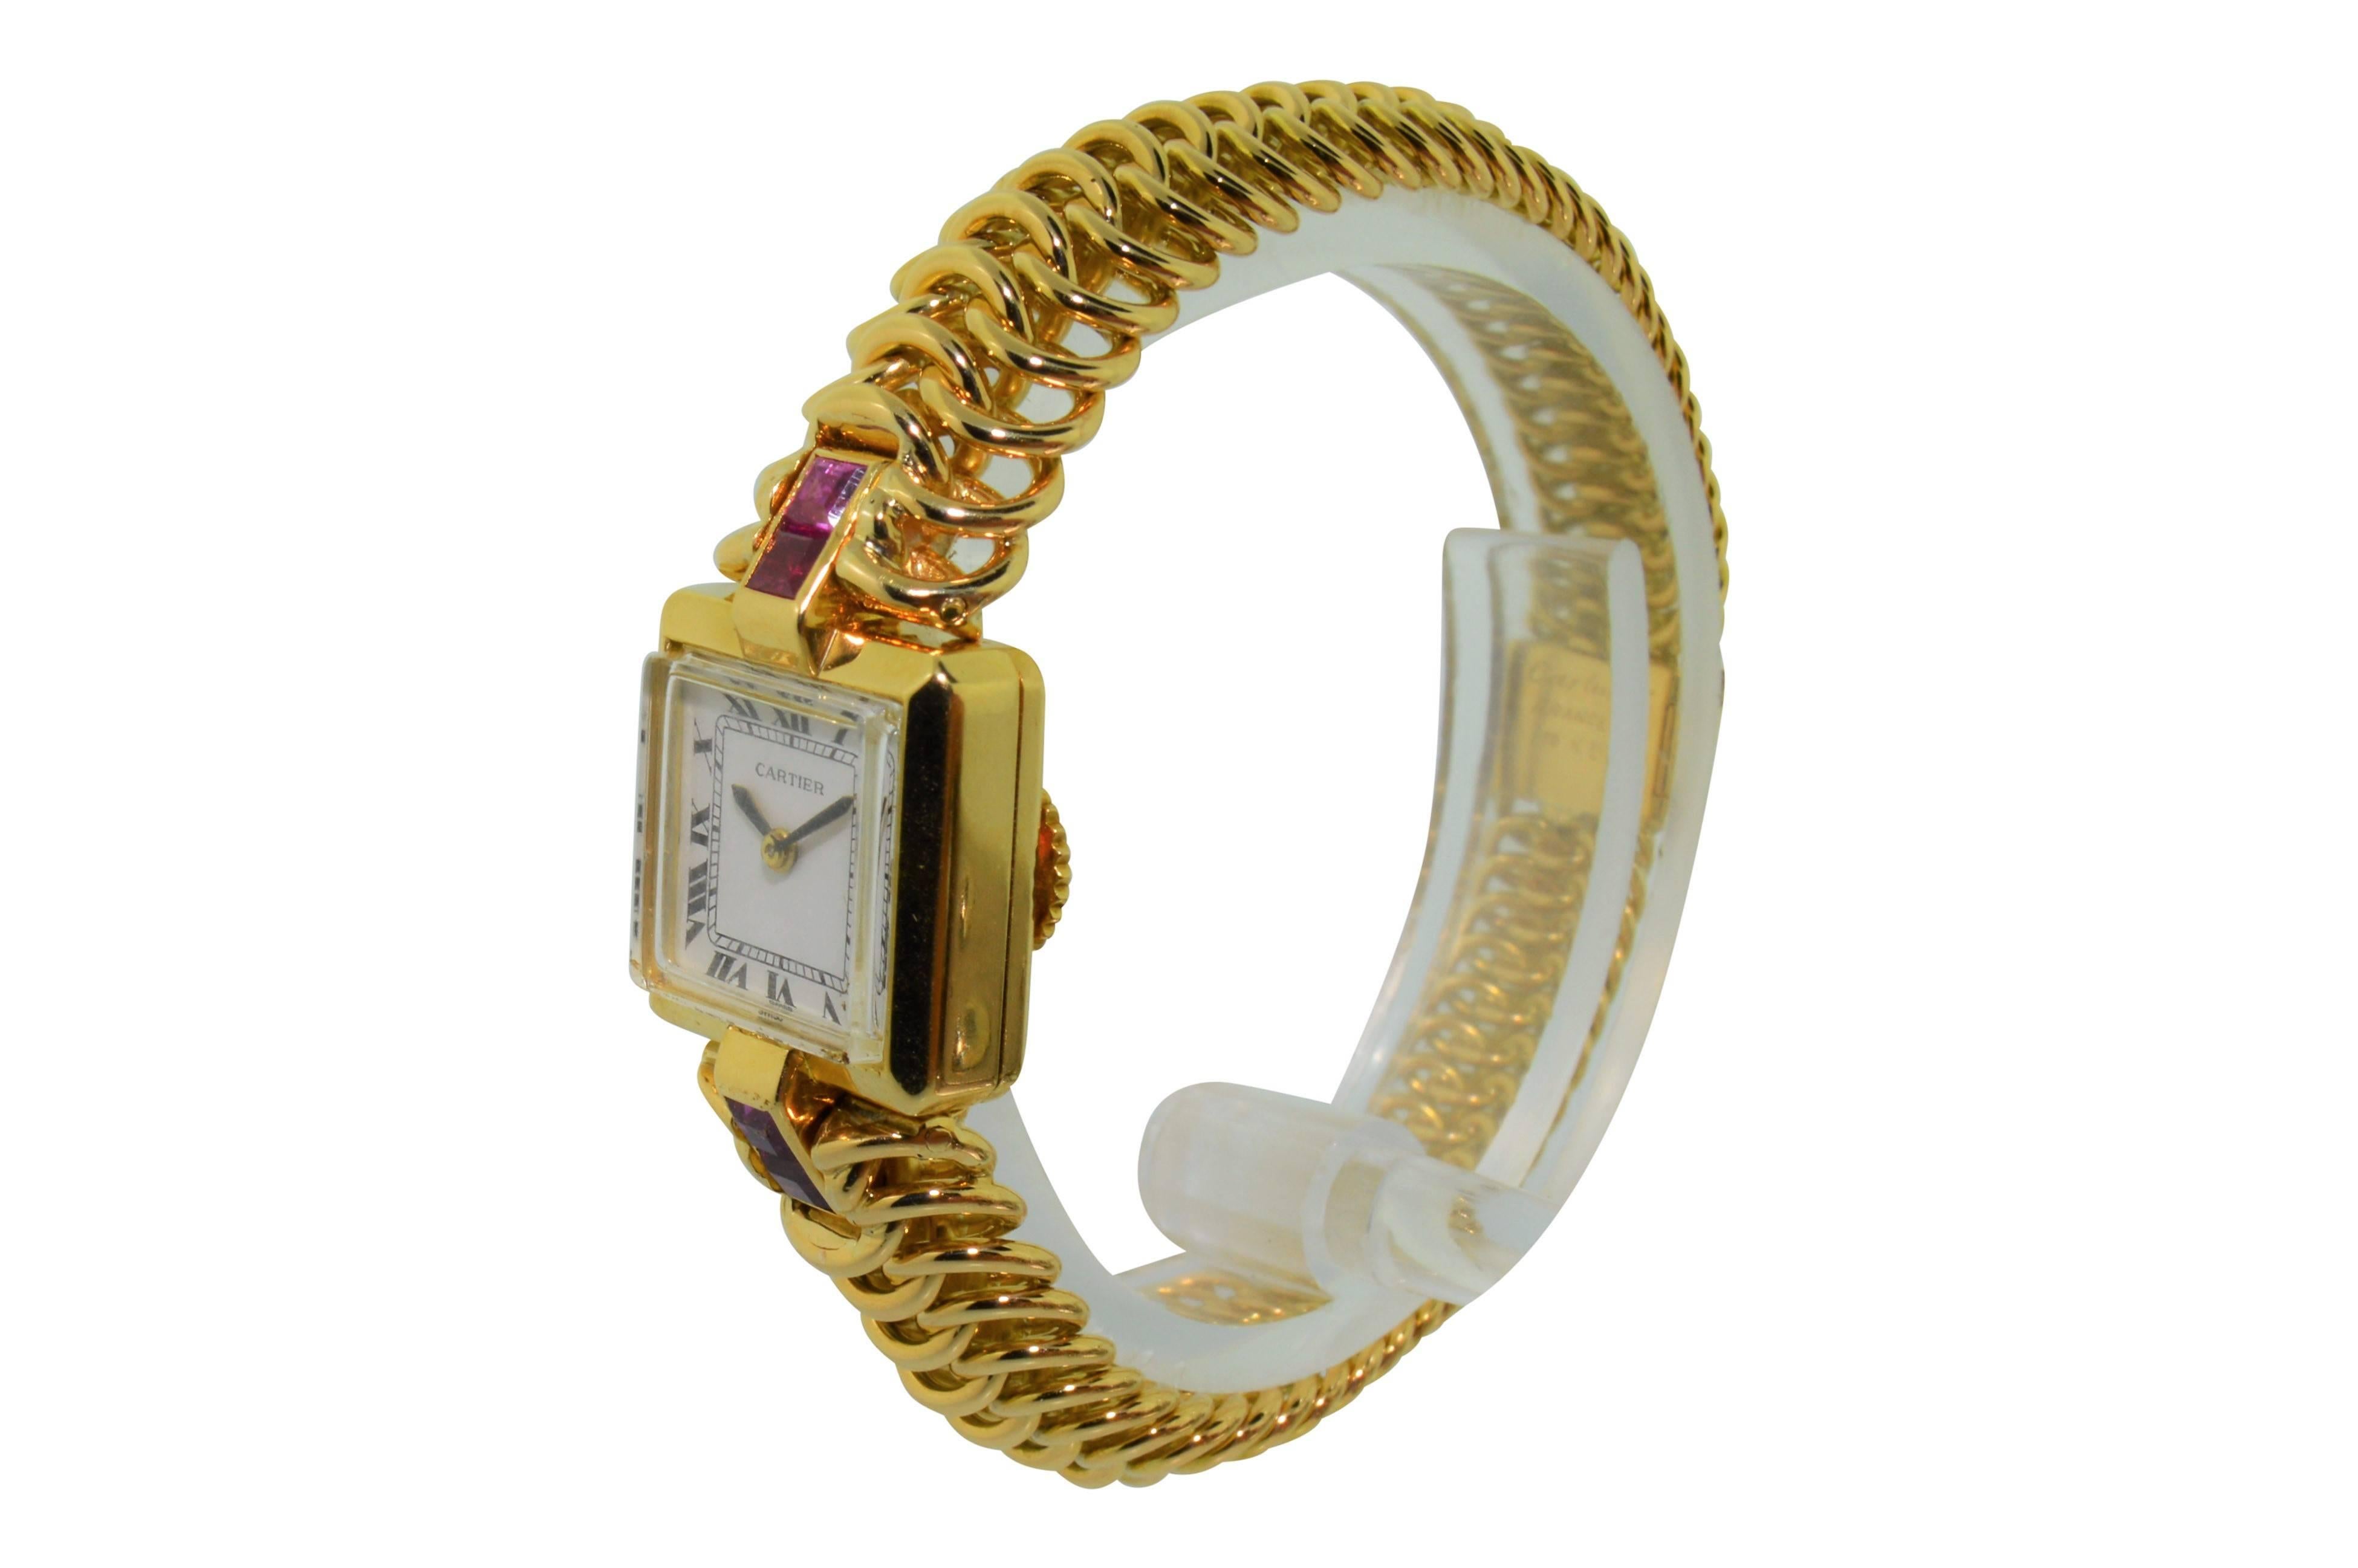 FACTORY / HOUSE: Cartier by Le Coultre / Ruby Set Bracelet Dress Watch
STYLE / REFERENCE: Art Deco
METAL / MATERIAL: 18Kt. Yellow Gold
CIRCA: 1950's
DIMENSIONS: 16mm  X 16mm
MOVEMENT / CALIBER: Back Winding / 17 Jewels
DIAL / HANDS: Roman with Leaf